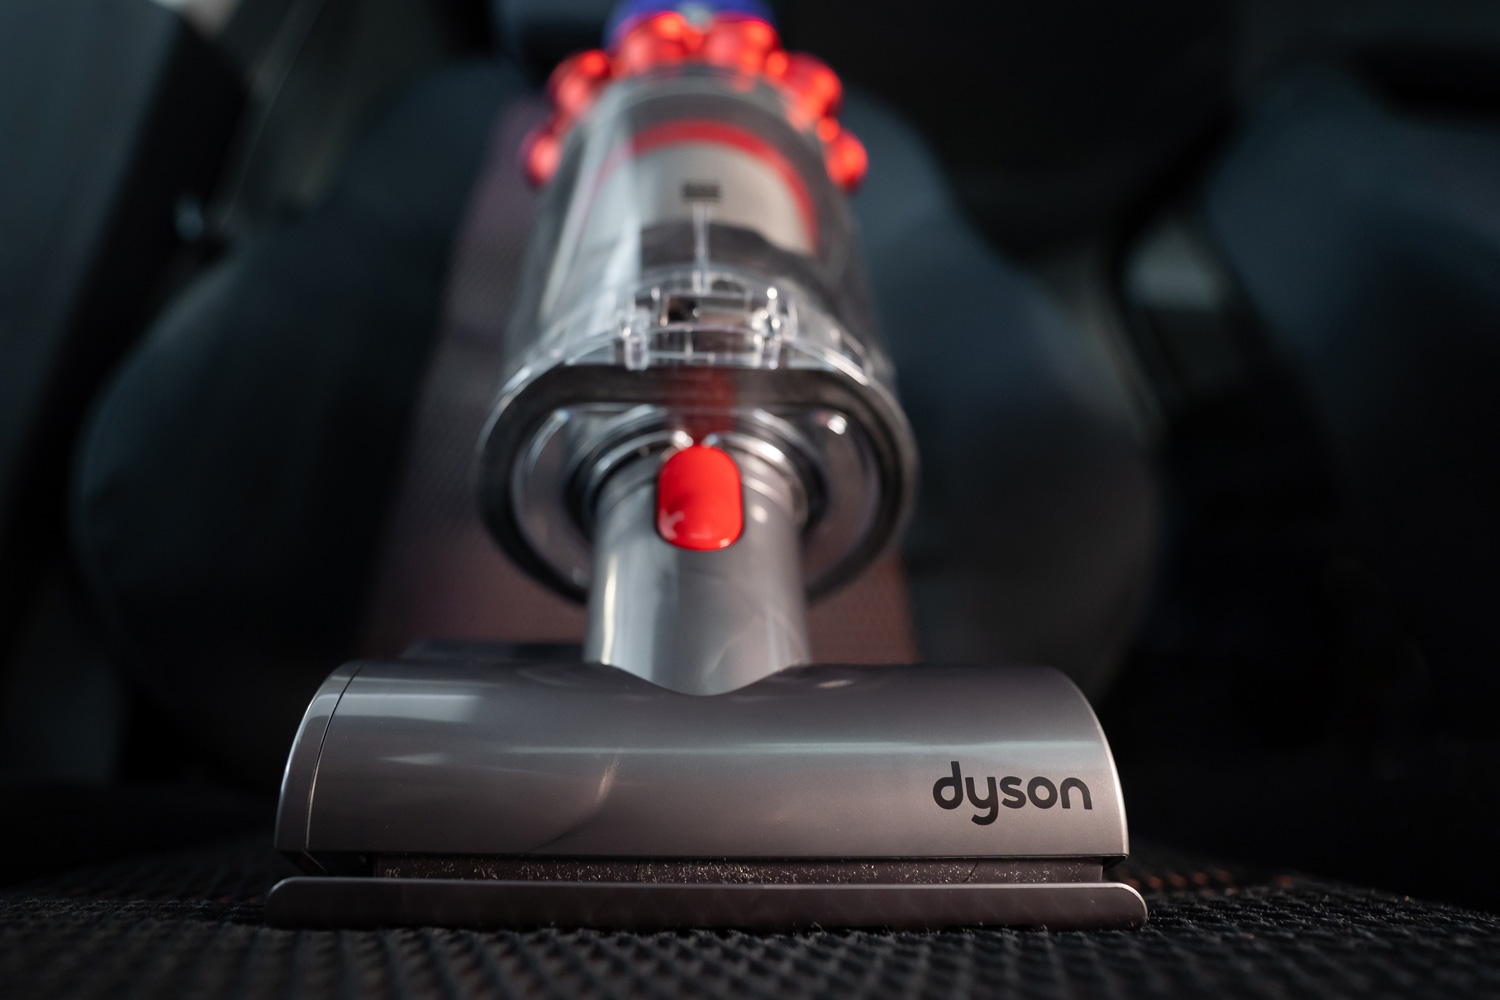 Close up of the Mini motorhead of Dyson Cyclone V10 Fluffy vacuum cleaner on car seats with car interior background.